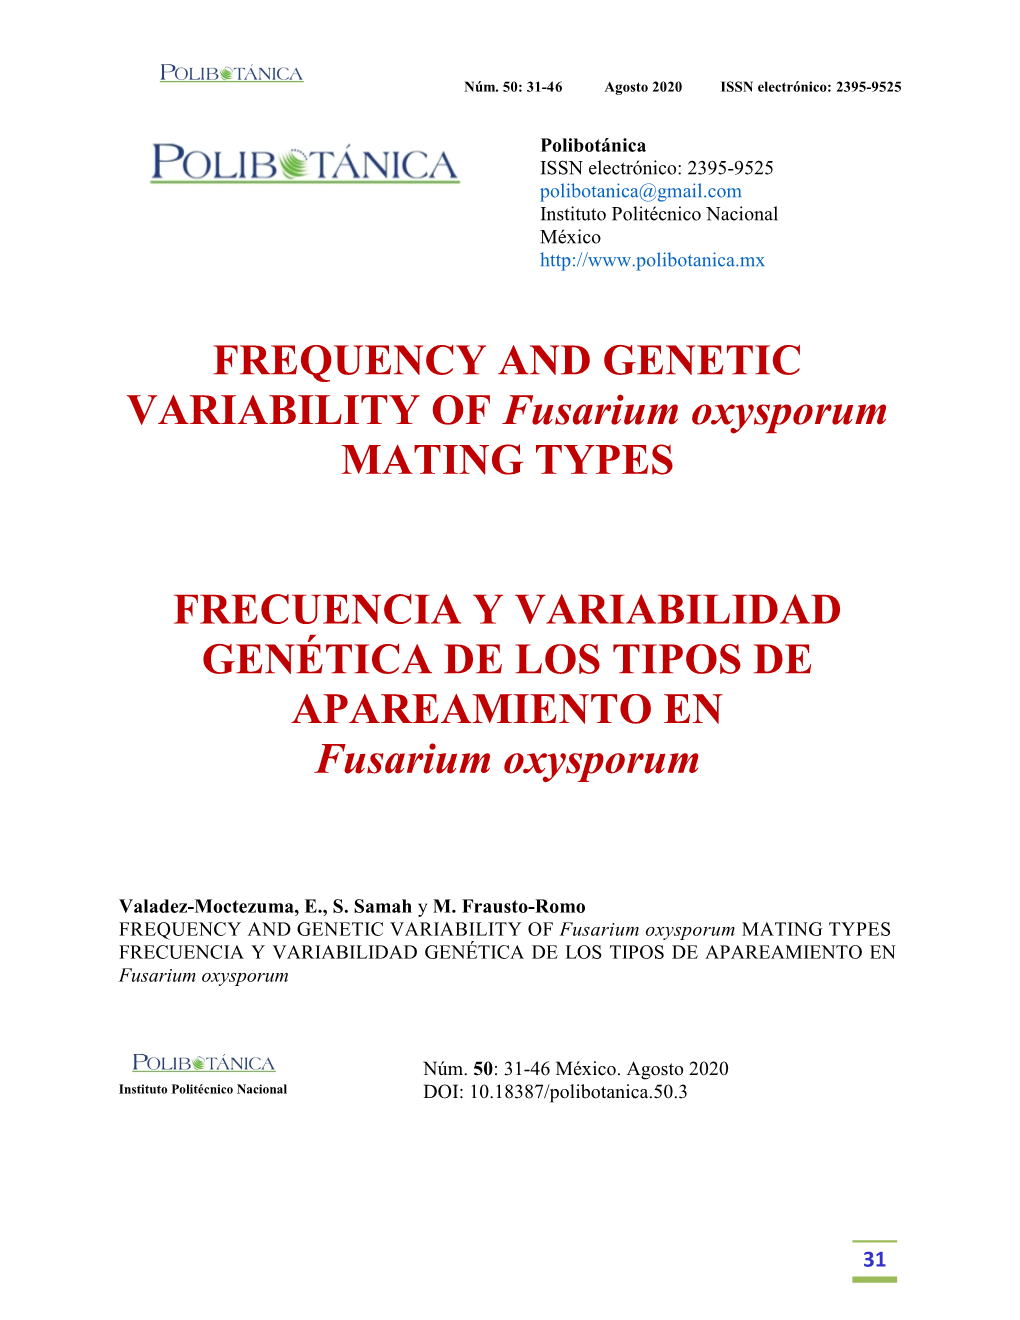 FREQUENCY and GENETIC VARIABILITY of Fusarium Oxysporum MATING TYPES